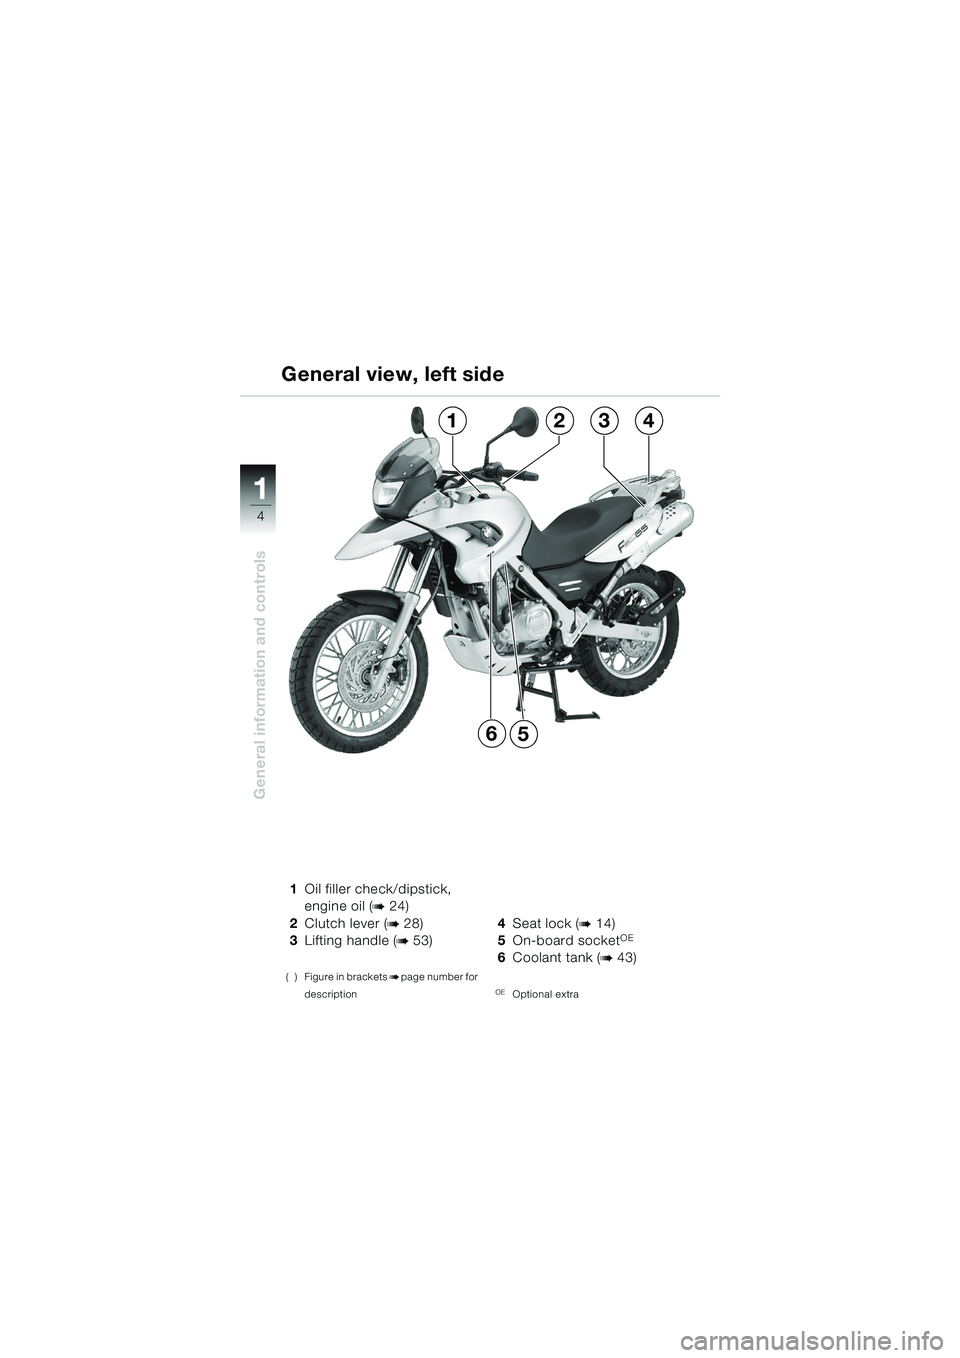 BMW MOTORRAD F 650 GS 2003  Riders Manual (in English) 11
4
General information and controls
1Oil filler check/dipstick, 
engine oil (
b24)
2 Clutch lever (
b28)
3 Lifting handle (
b53)
( ) Figure in bracketsbpage number for 
description
4 Seat lock (b14)